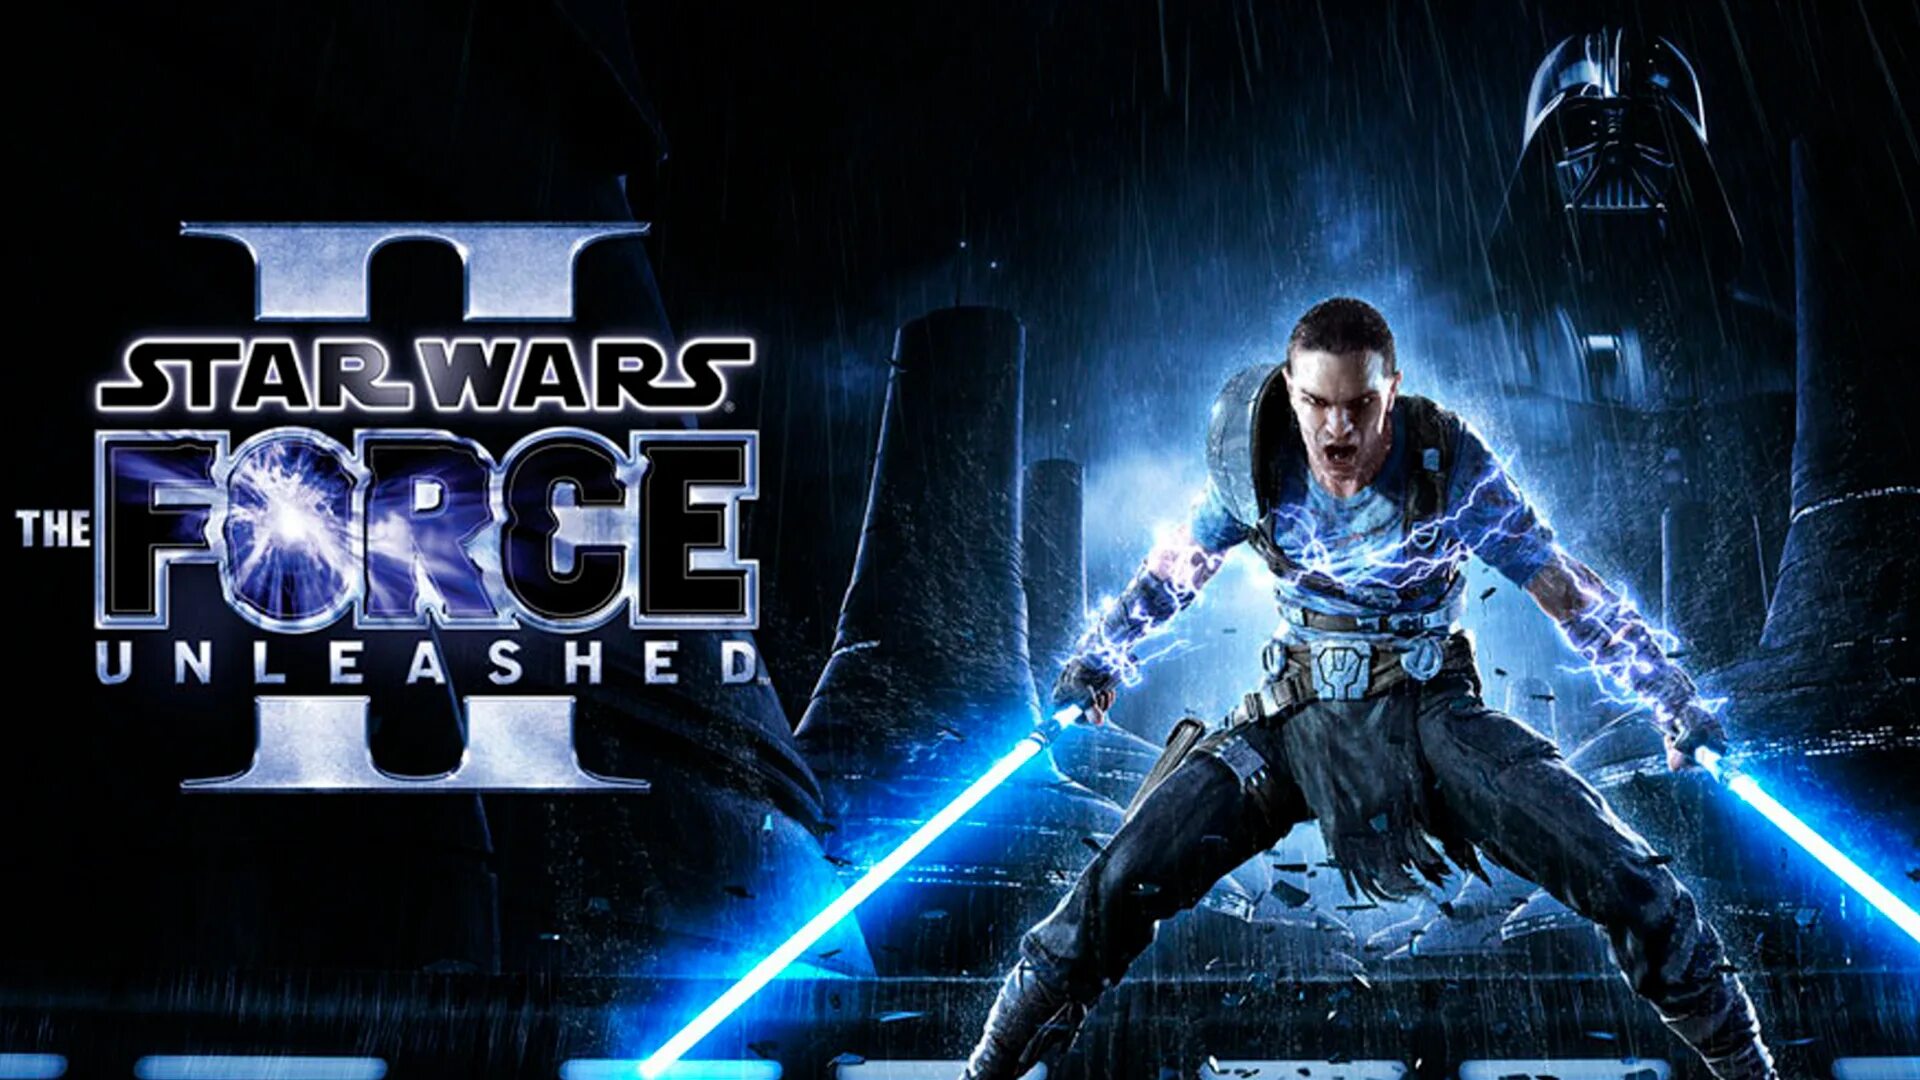 Star wars the force unleashed коды. Star Wars the Force unleashed 2 Постер. Star Wars the Force unleashed 1 обложка. Star Wars the Force unleashed 2 обложка. Star Wars the Force unleashed Постер.